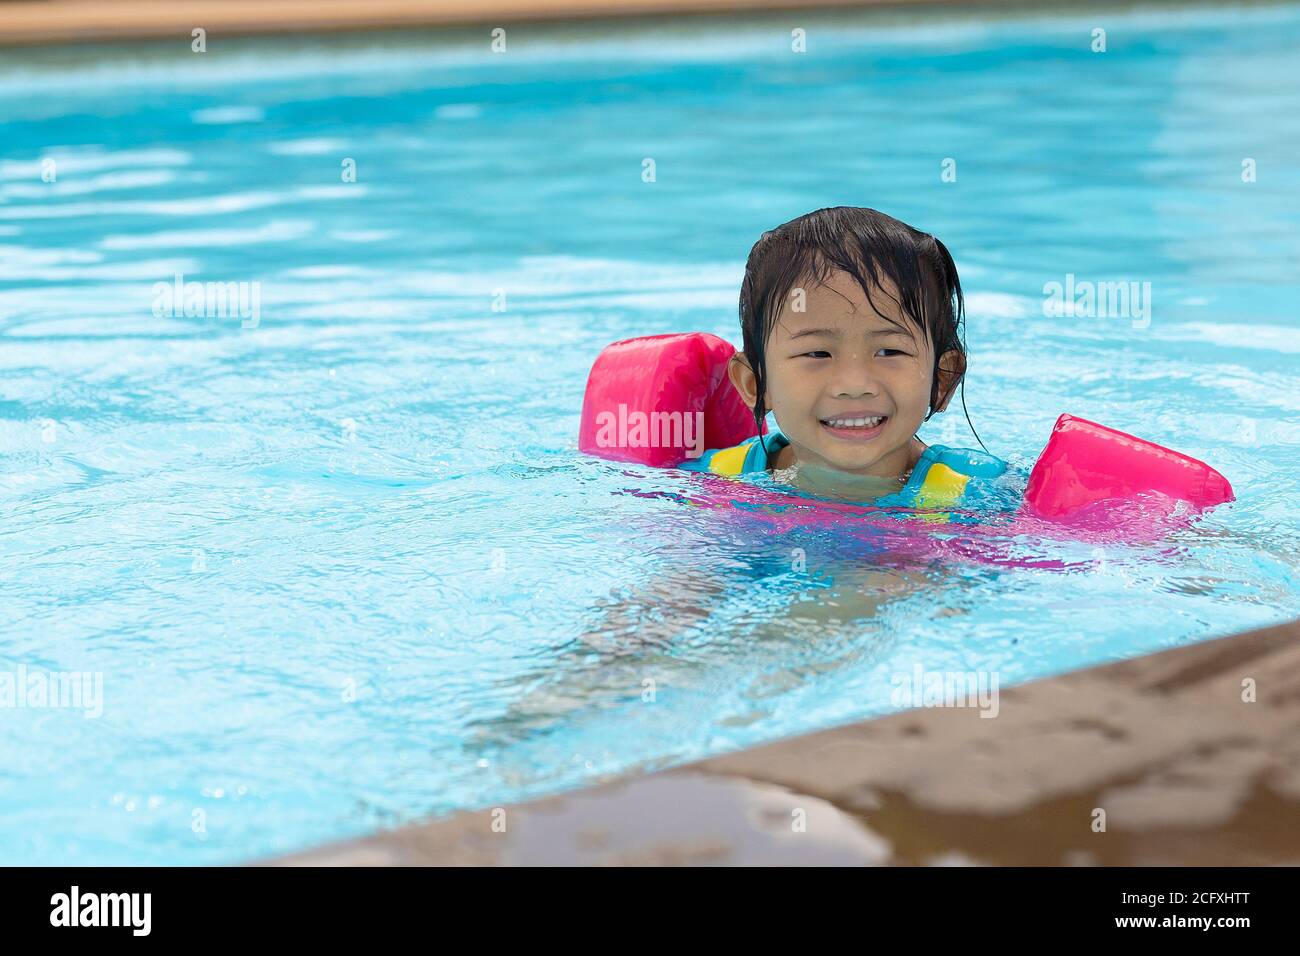 Asian cute little toddler girl in a colorful swimming suit relaxing in a pool having fun during summer vacation in a tropical resort. Stock Photo